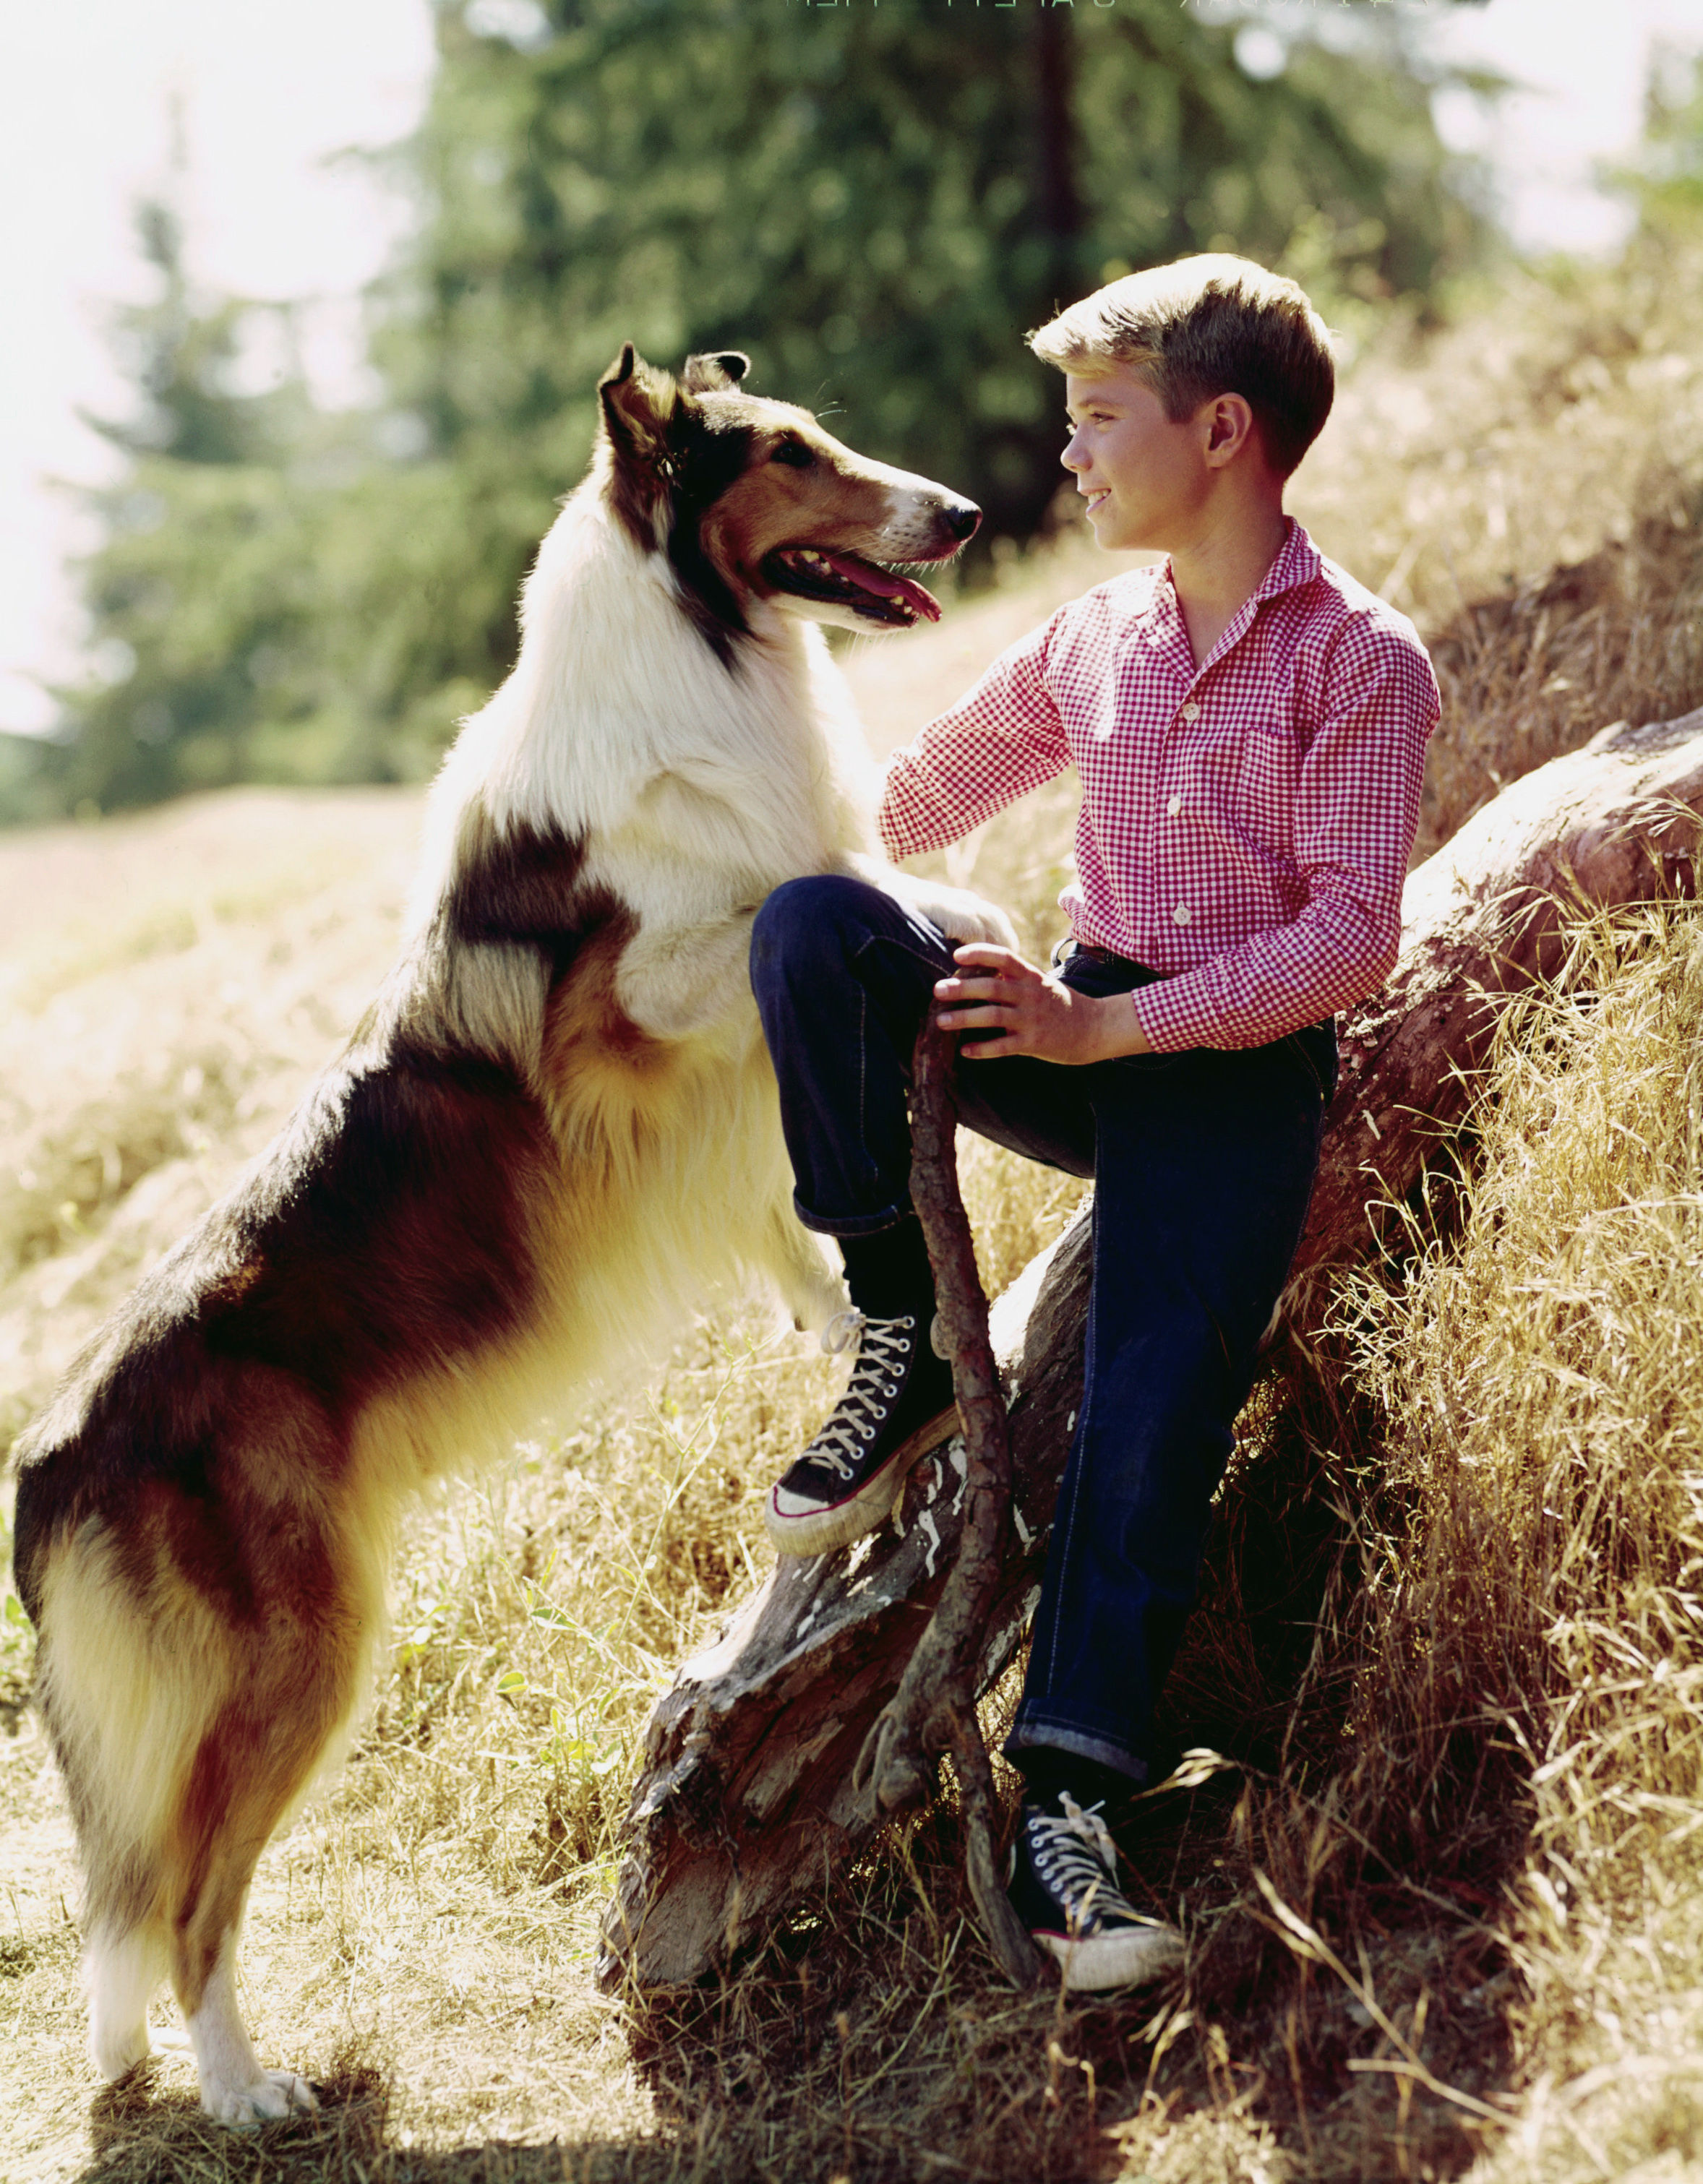 Baby, as Lassie, and Jon Provost, as Timmy Martin, in a promotional still for "Lassie," circa 1960 | Source: Getty Images